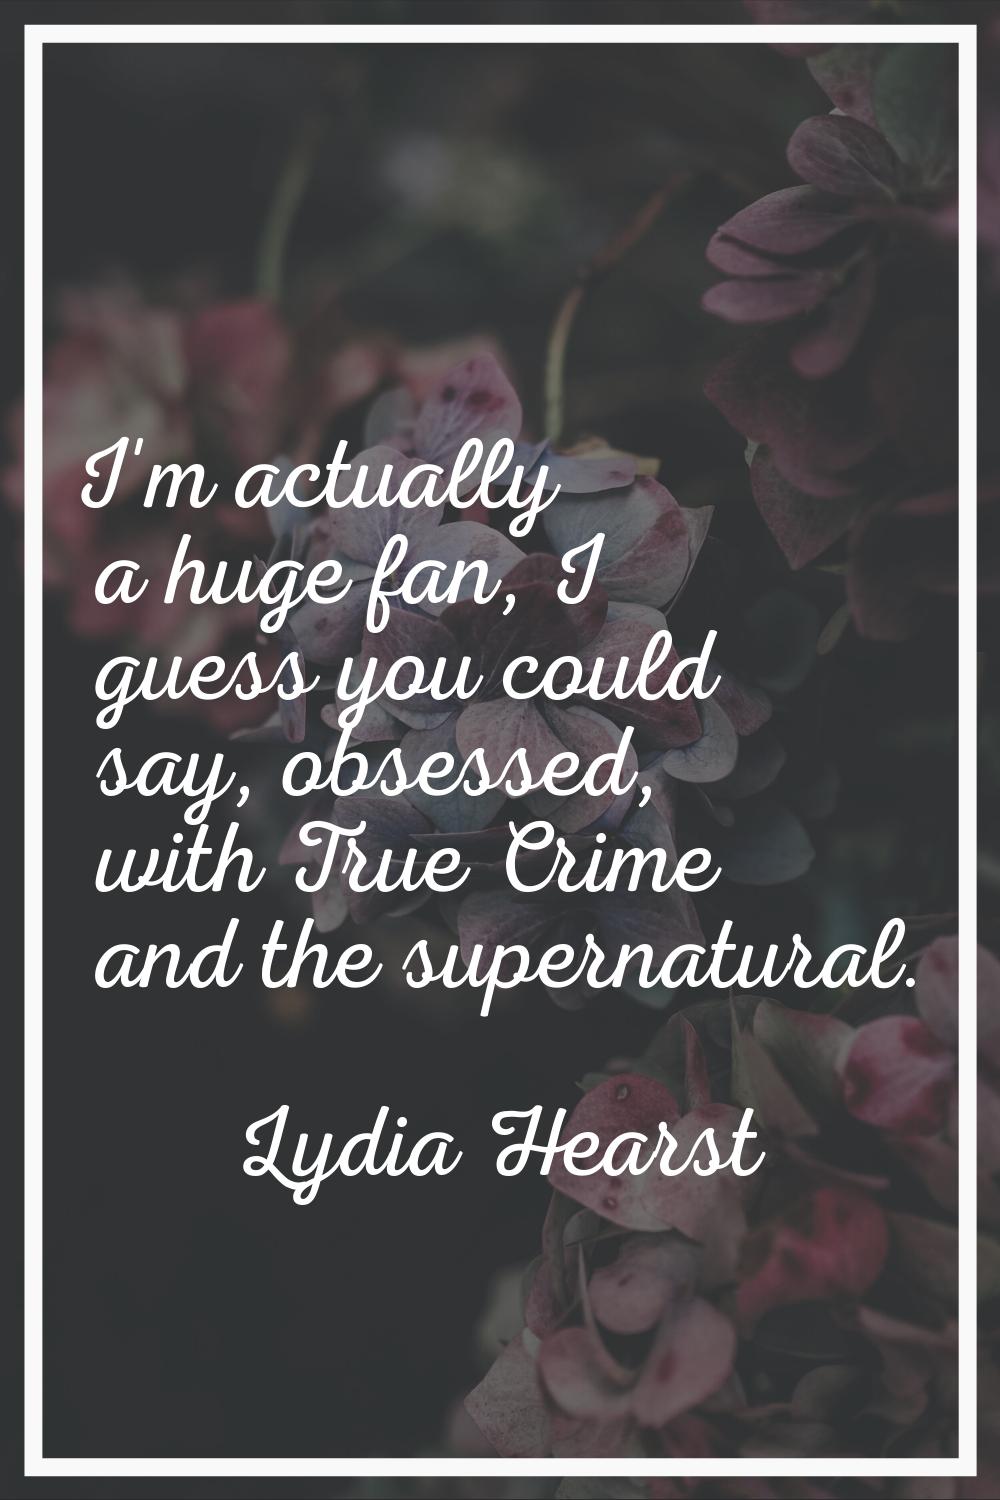 I'm actually a huge fan, I guess you could say, obsessed, with True Crime and the supernatural.